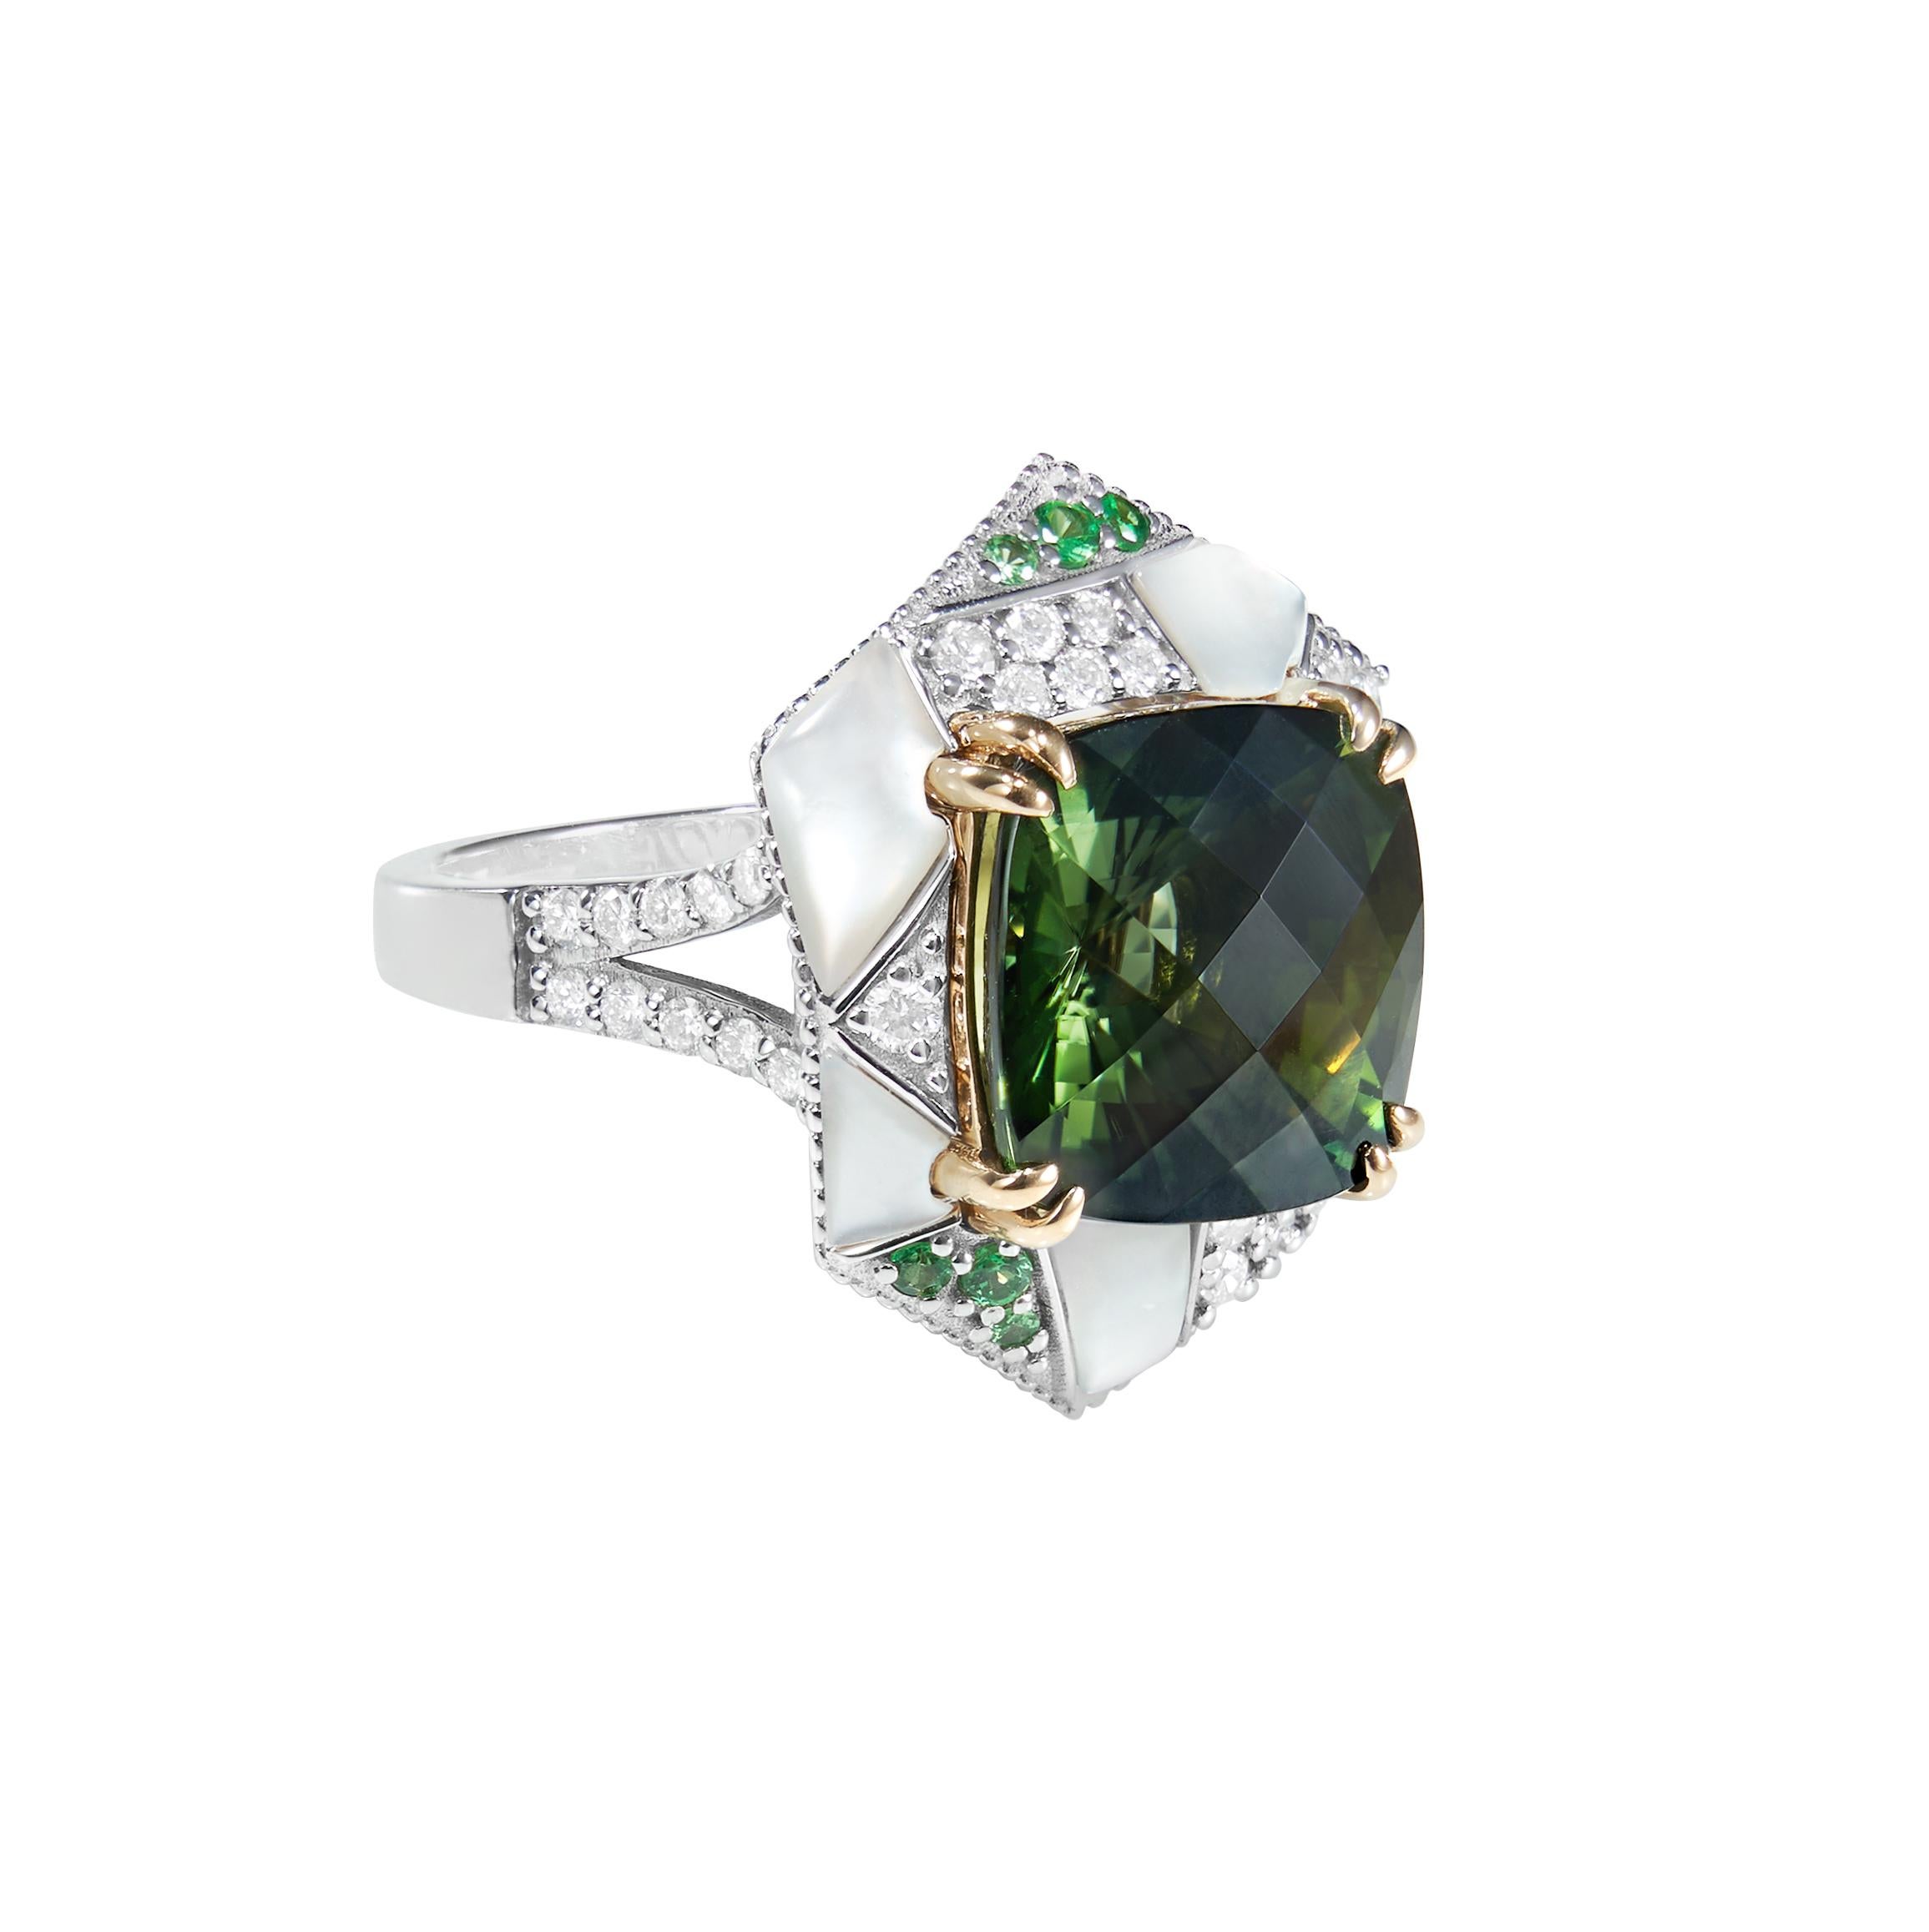 Mystic Green Tourmalines centered on an irregular frame of Tsavorites, Mother of Pearl and Diamonds. Combined with subtle gold detailing the tourmalines are hypnotising with its deep green hue.

Mystic Green Tourmaline Ring with Tsavorites, Mother